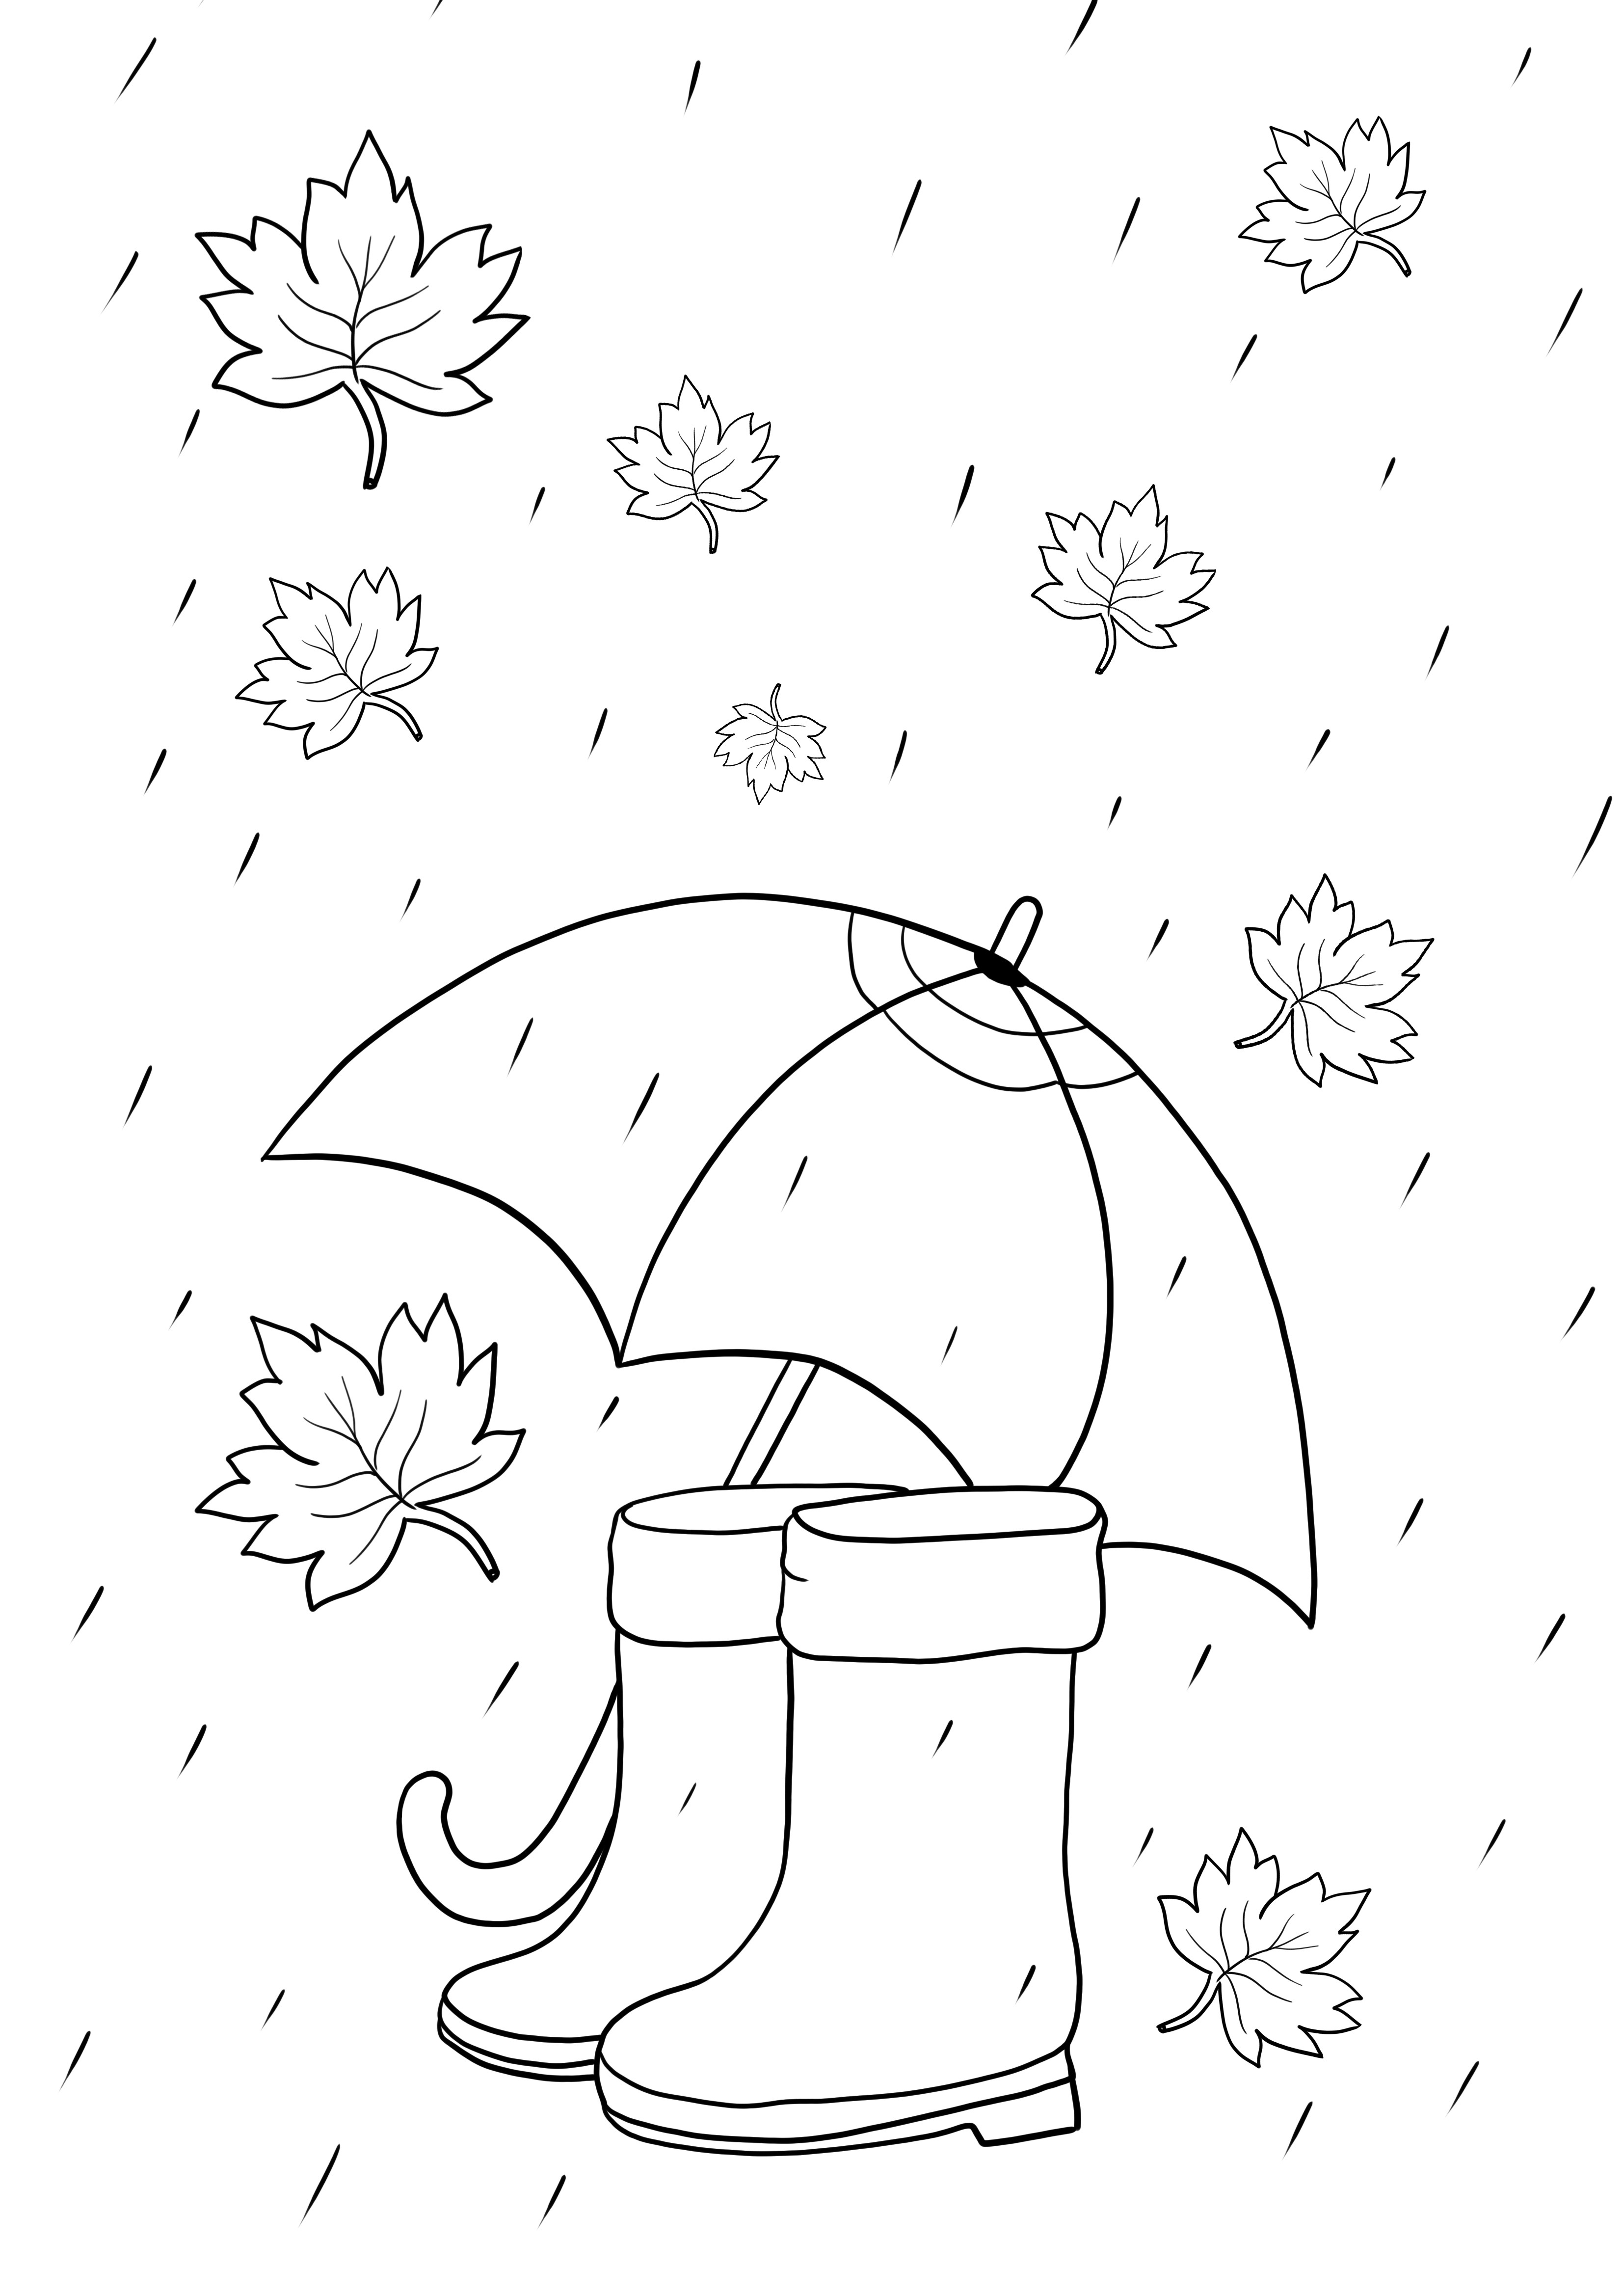 Rainy weather items-umbrella and boots to print or download for free